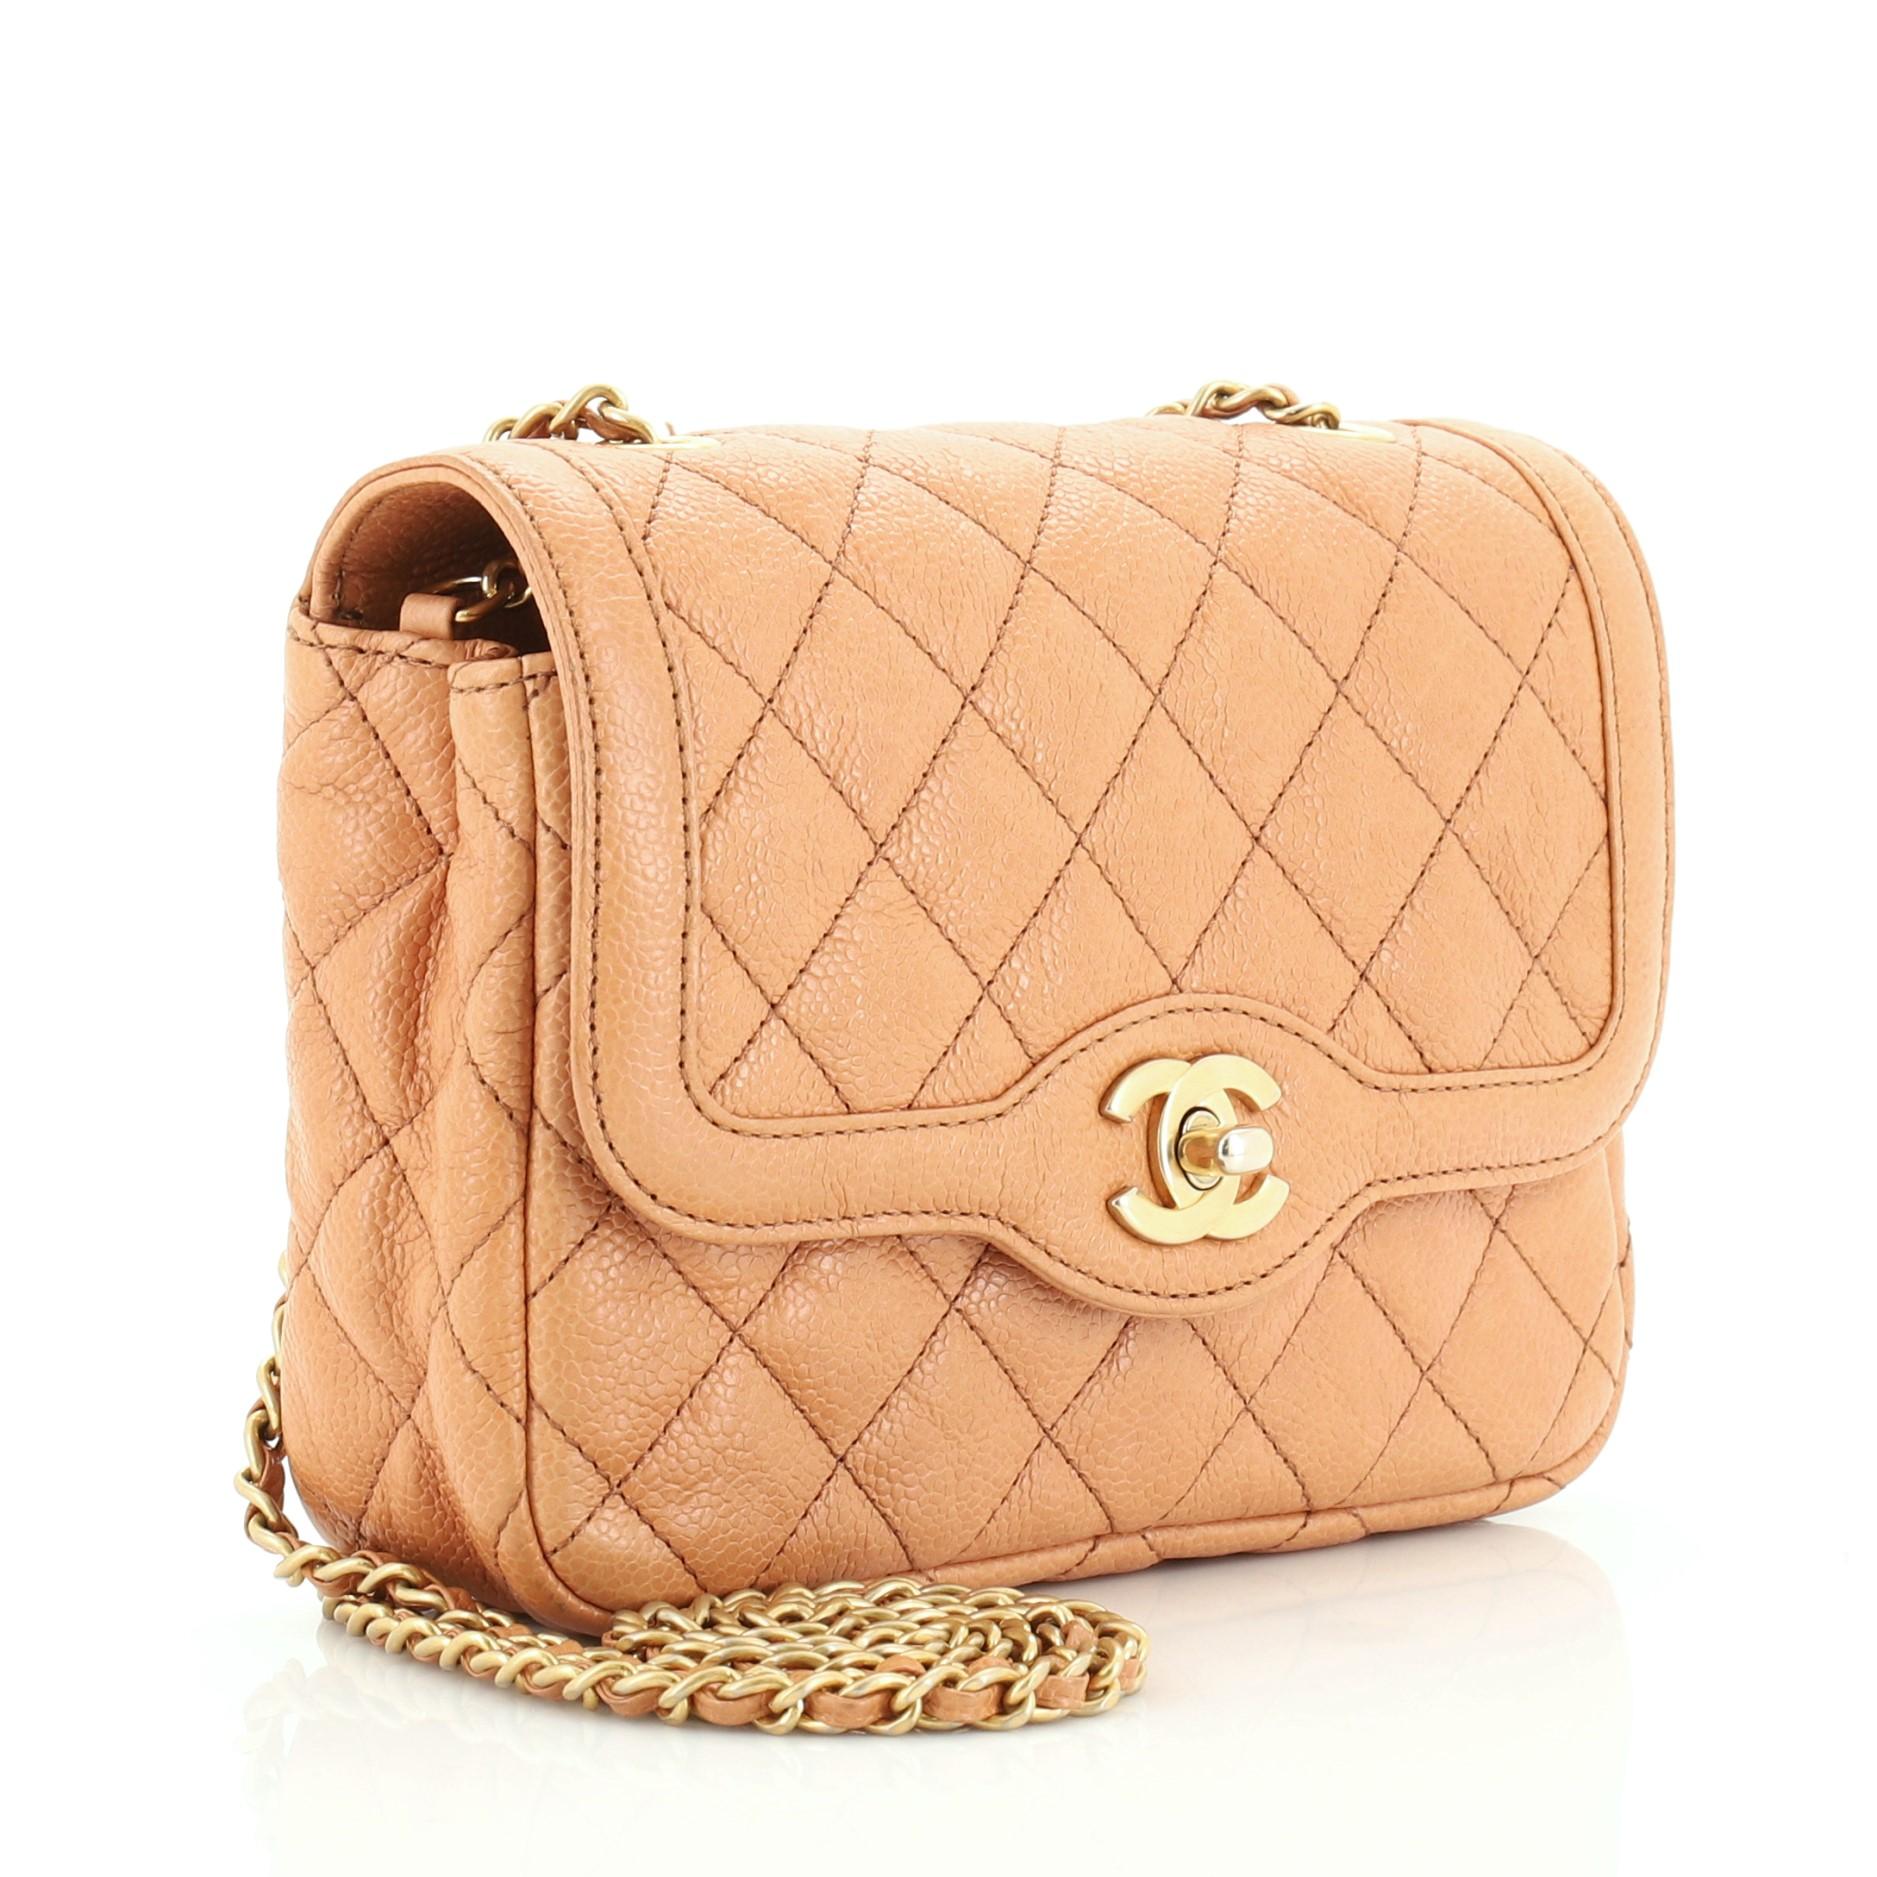 This Chanel Two Tone Flap Bag Quilted Caviar Mini, crafted from brown quilted caviar leather, features woven-in leather chain straps, exterior back slip pocket, and gold-tone hardware. Its CC turn-lock closure opens to a brown leather interior with